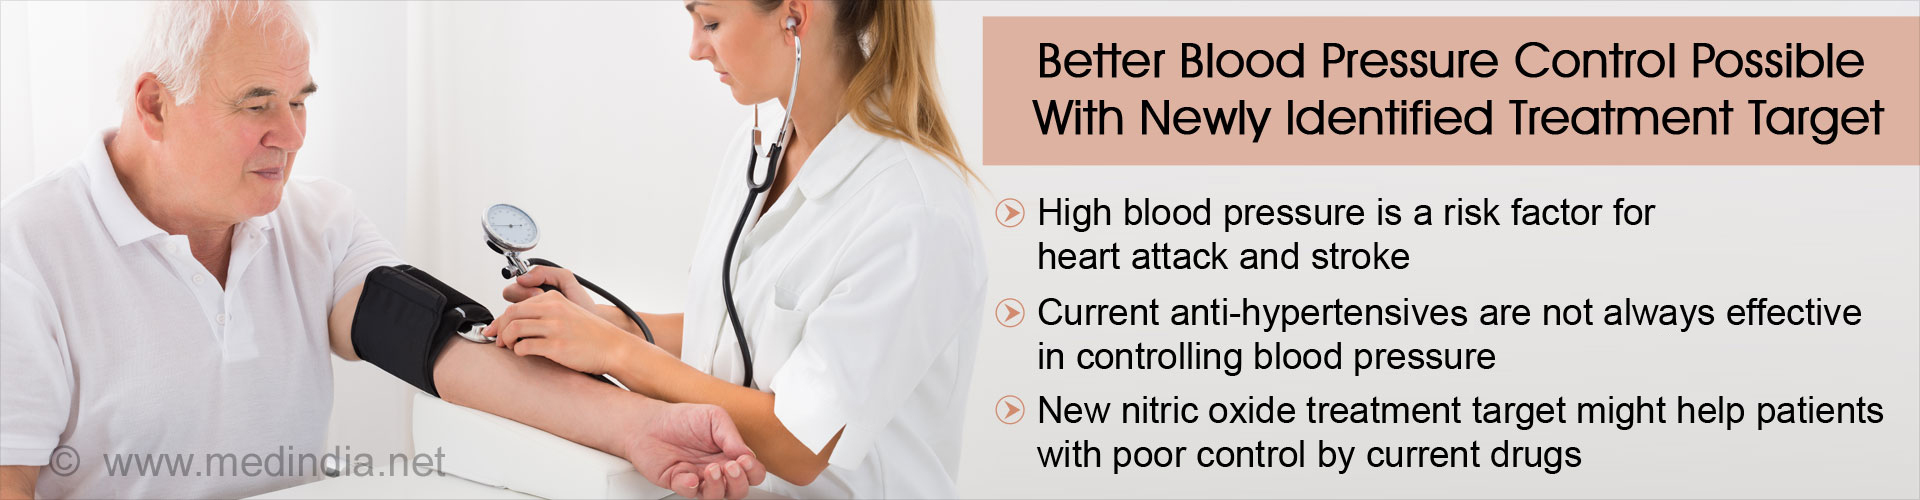 Better blood pressure control possible with newly identified treatment target
- High blood pressure is a risk factor for heart attack and stroke
- Current anti-hypertensive are not always effective in controlling blood pressure
- New nitric oxide treatment target might help patients with poor control by current drugs